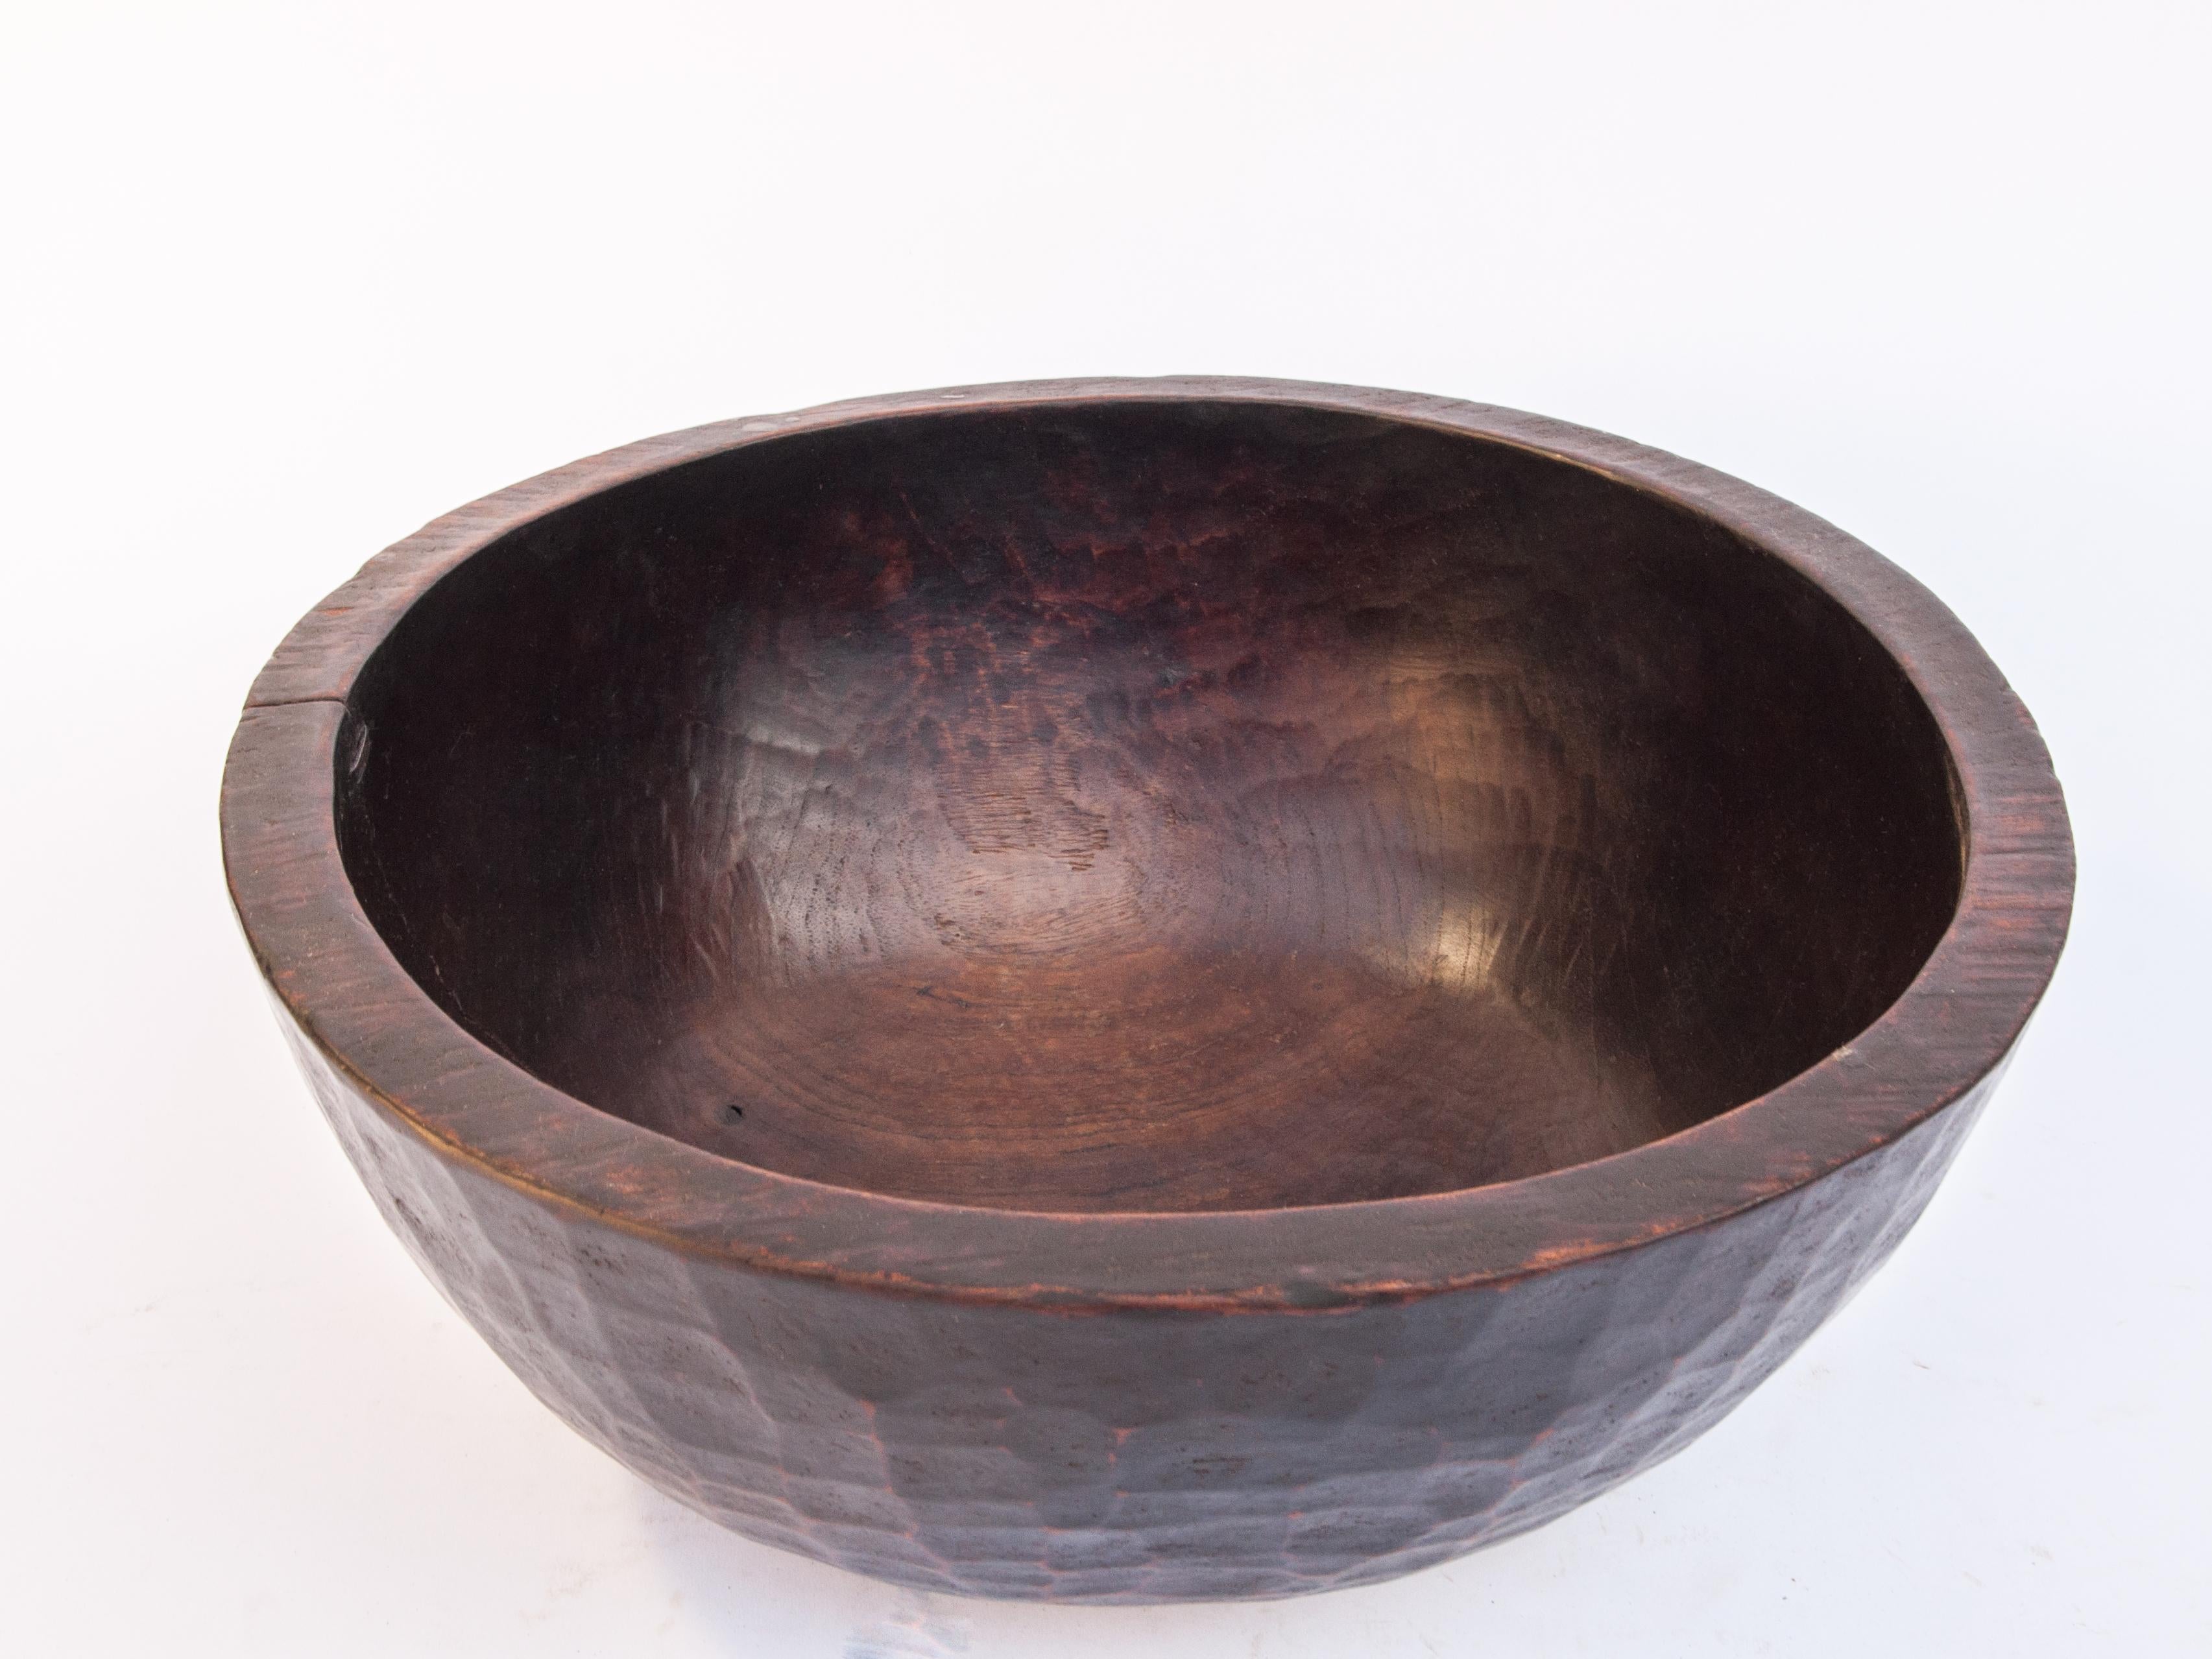 Old tribal wooden bowl, West Nepal Himal, mid-20th century. Measures: 16.5 inch diameter.
This large bowl is hand hewn from a single piece of local wood. Years of use in the rugged conditions of a west Nepal household, and exposure to household